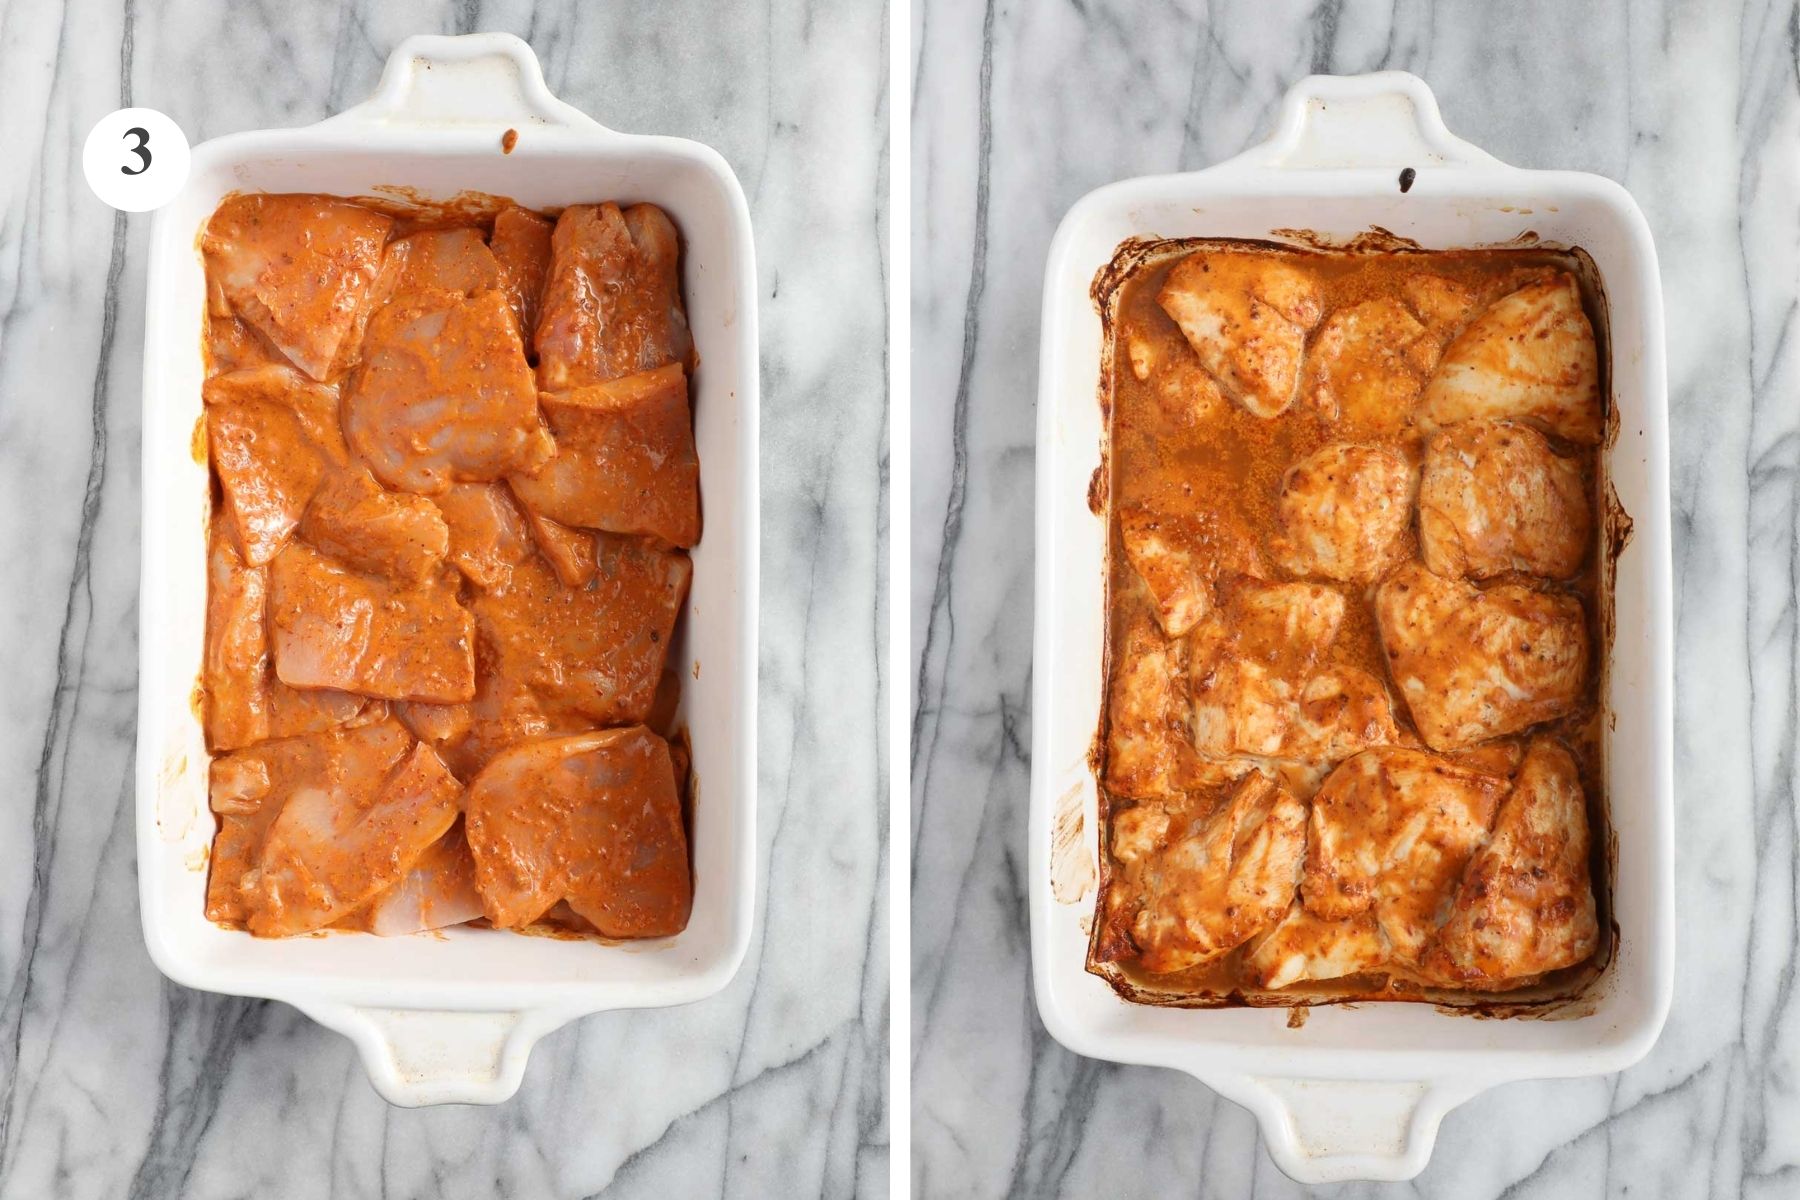 Chicken in chipotle sauce before and after being baked.